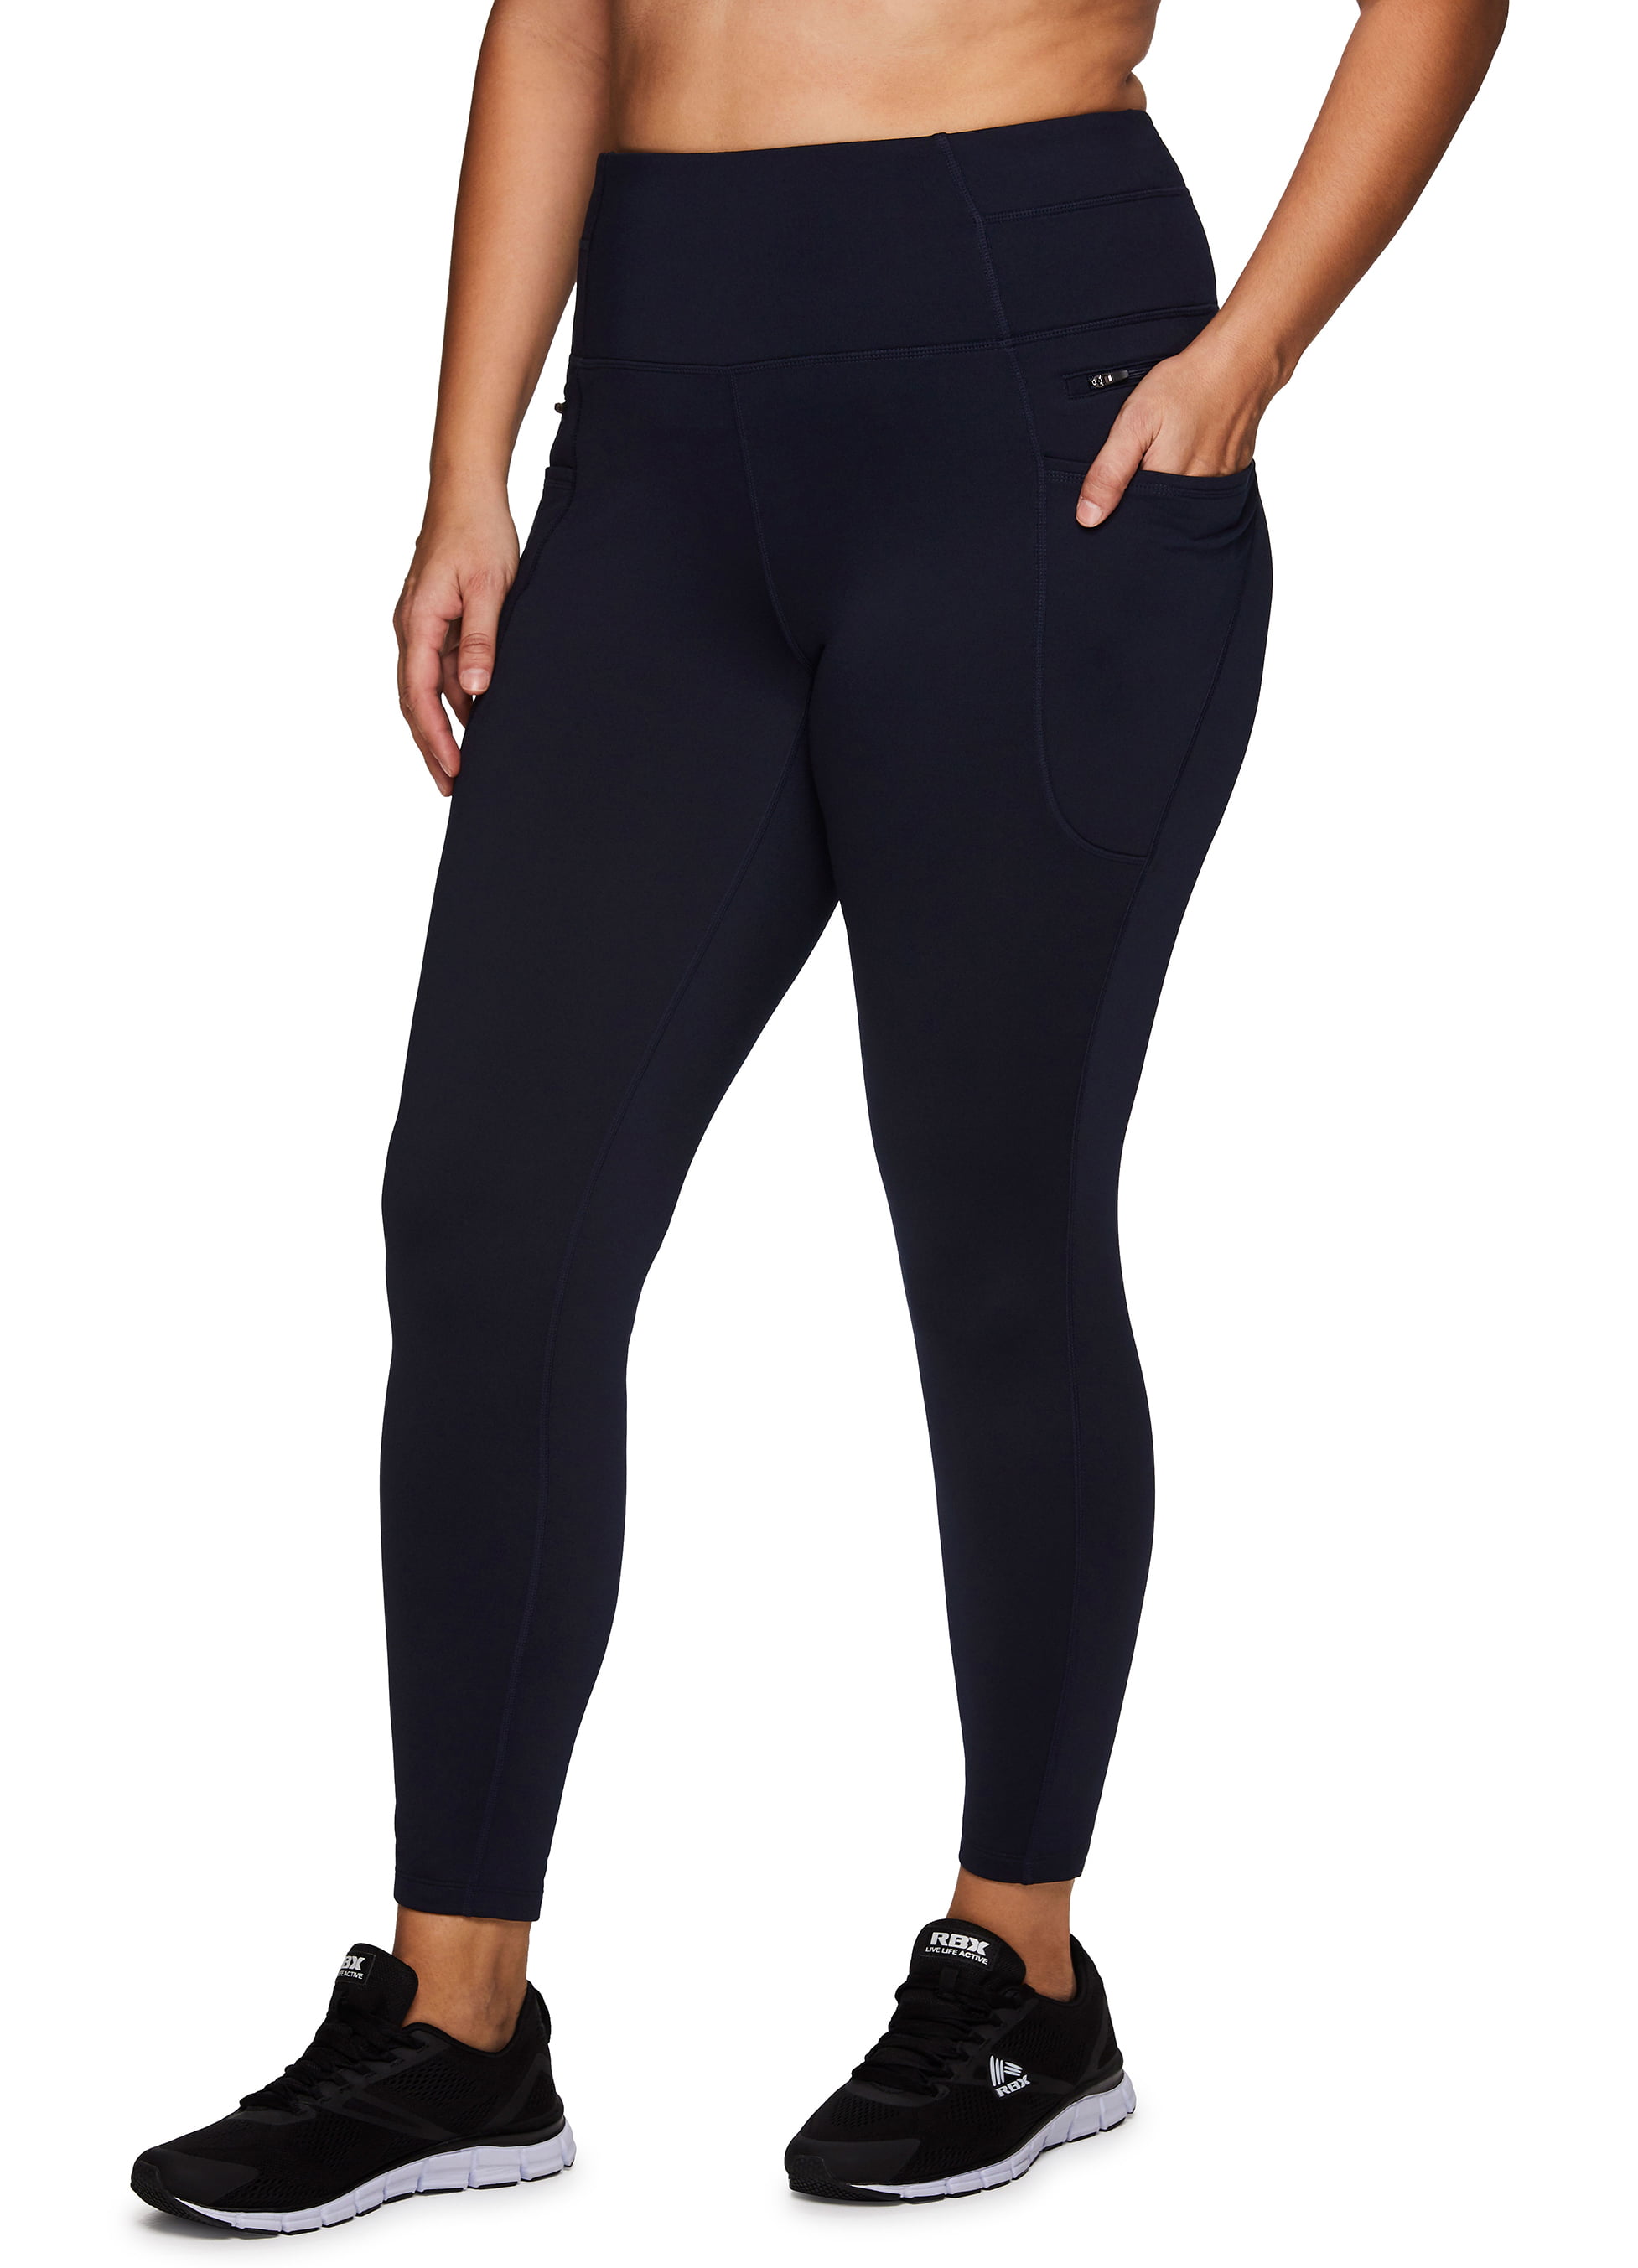 RBX Active Women's Plus Size Full Length High Waist Fleece Lined Leggings  with Pockets 